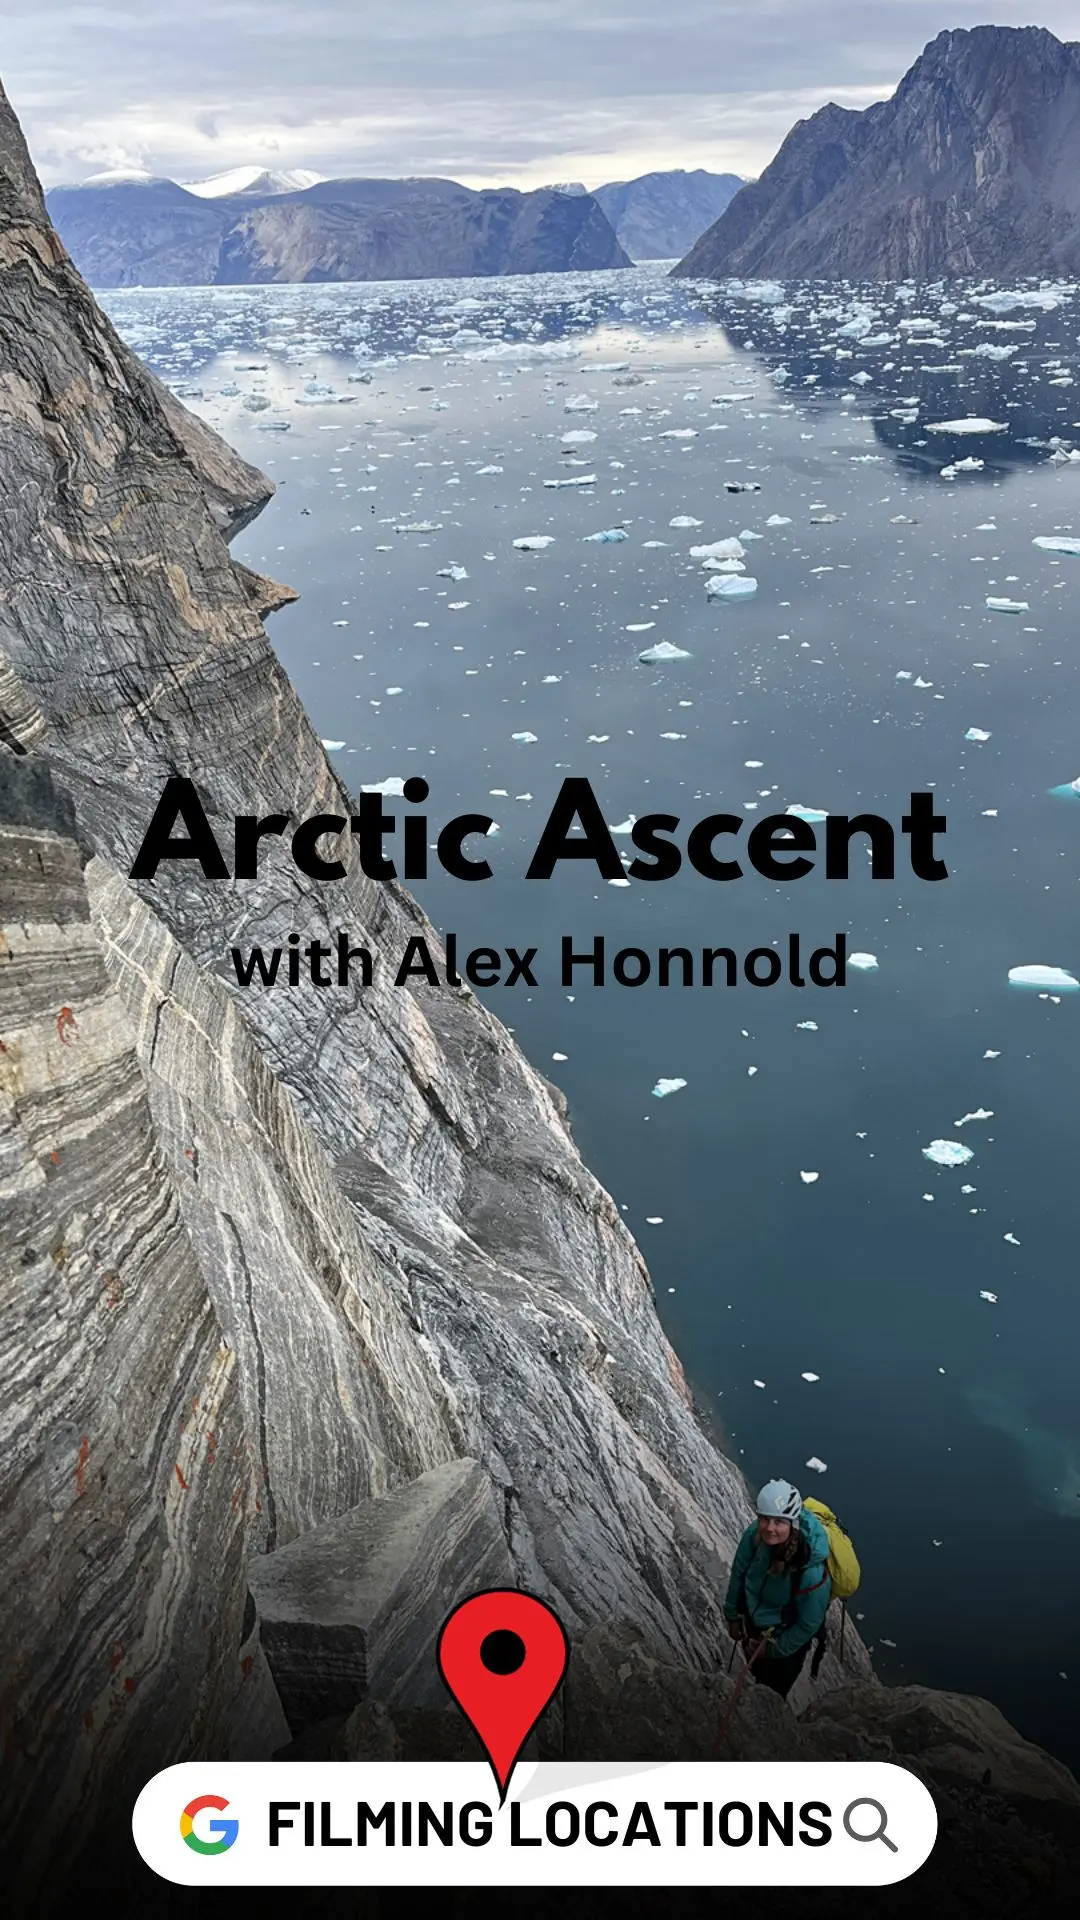 Arctic Ascent with Alex Honnold Filming Locations